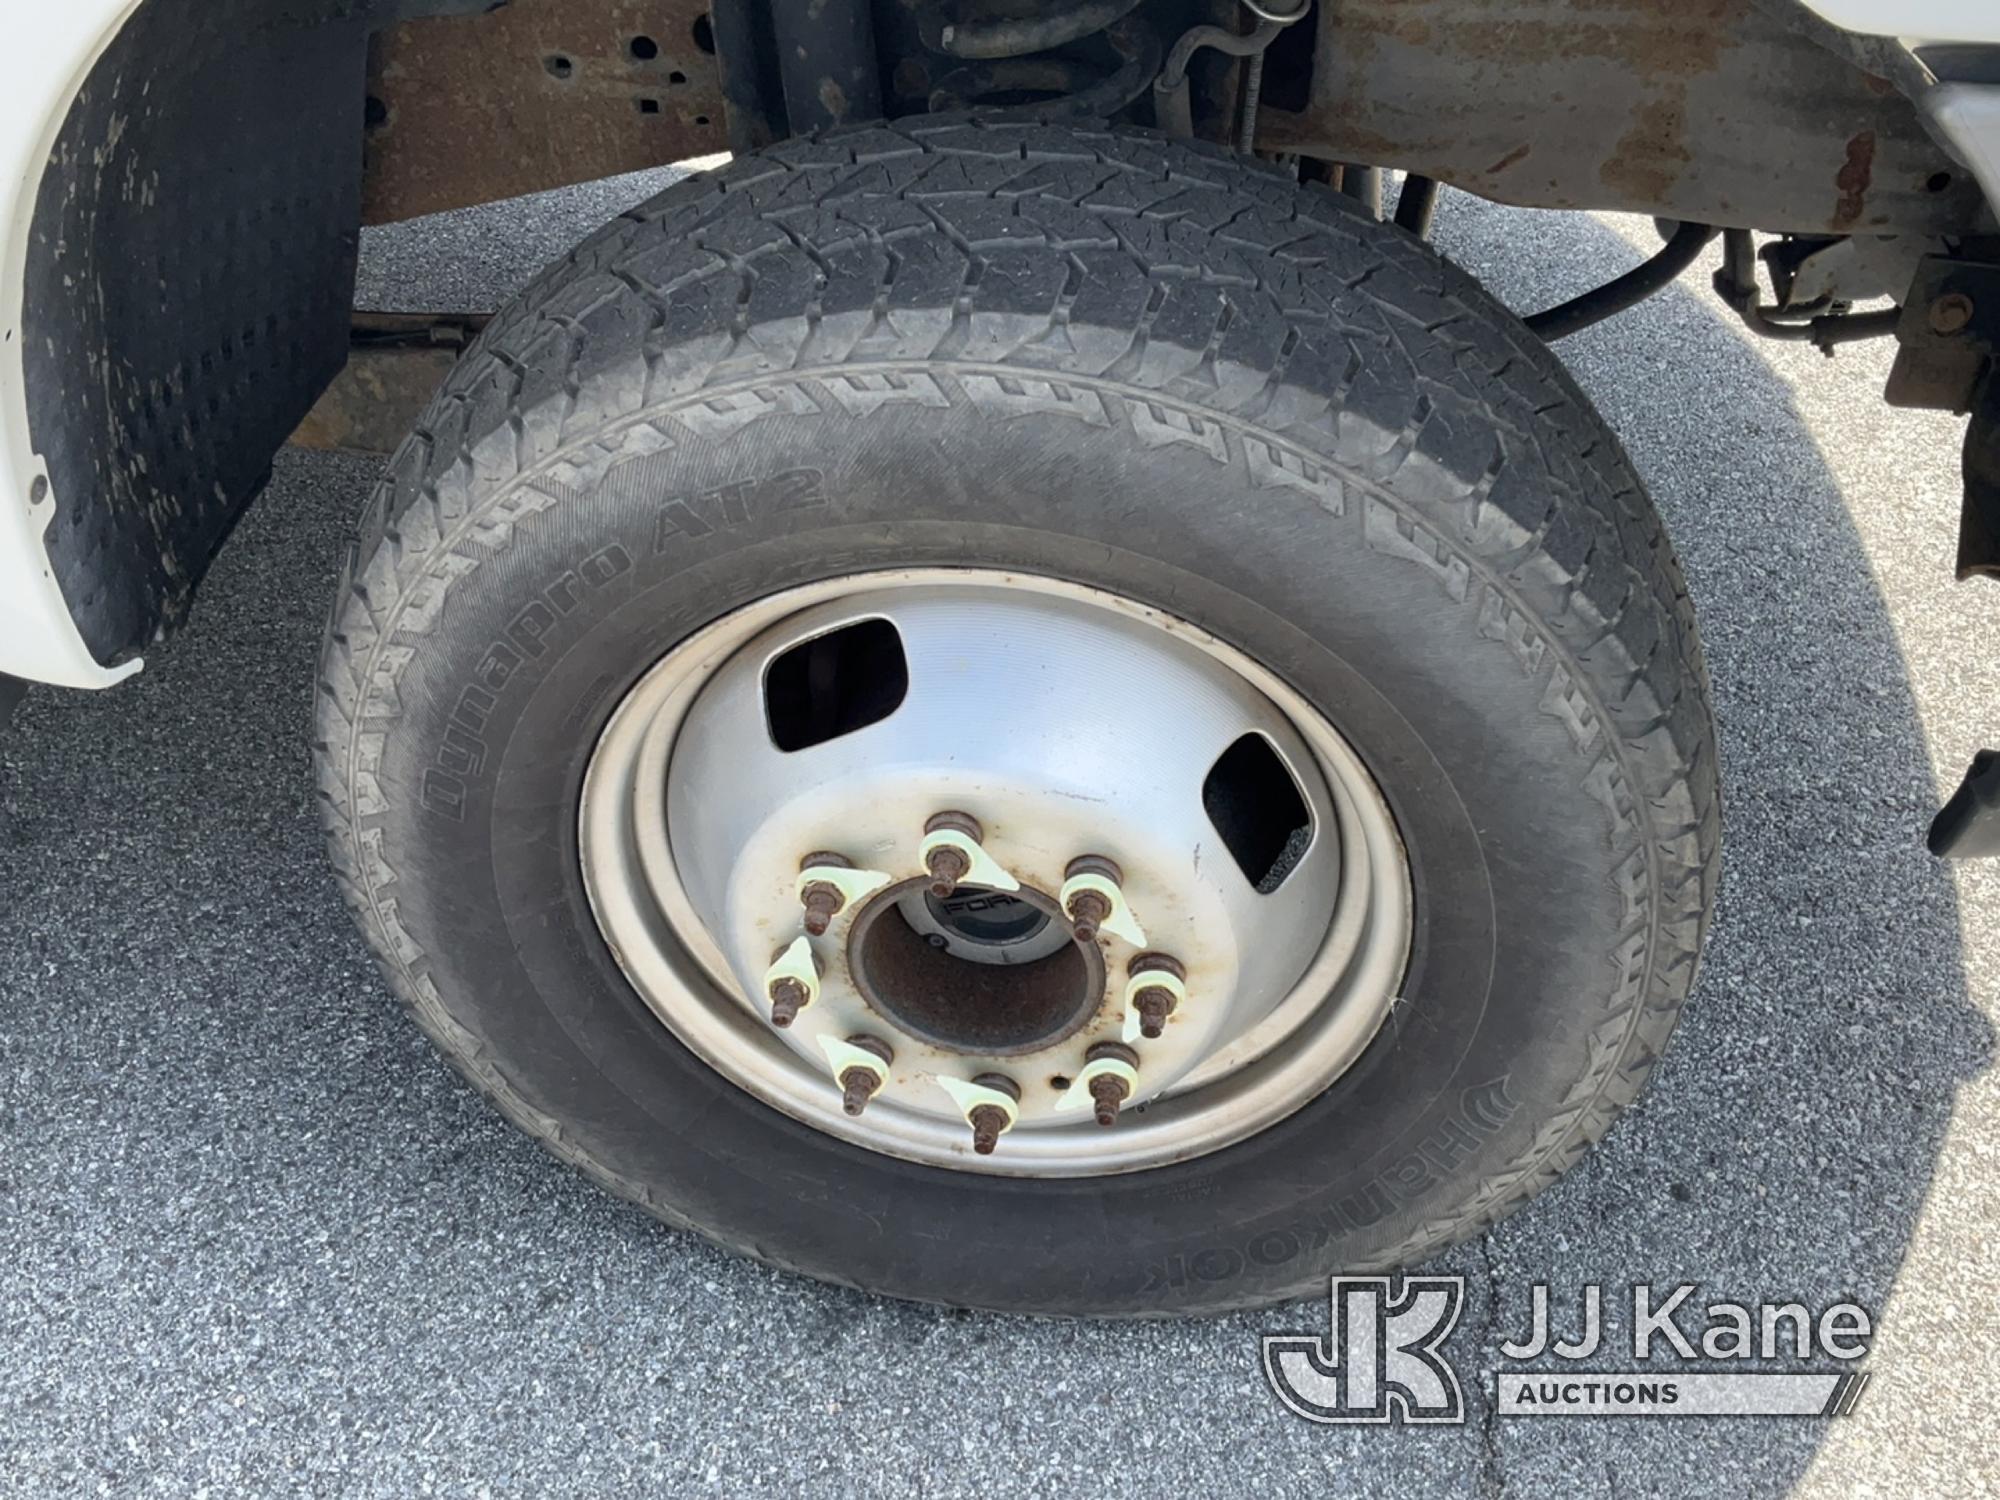 (Chester Springs, PA) 2005 Ford F350 4x4 Service Truck Runs Rough & Moves, Body & Rust Damage, Liftg